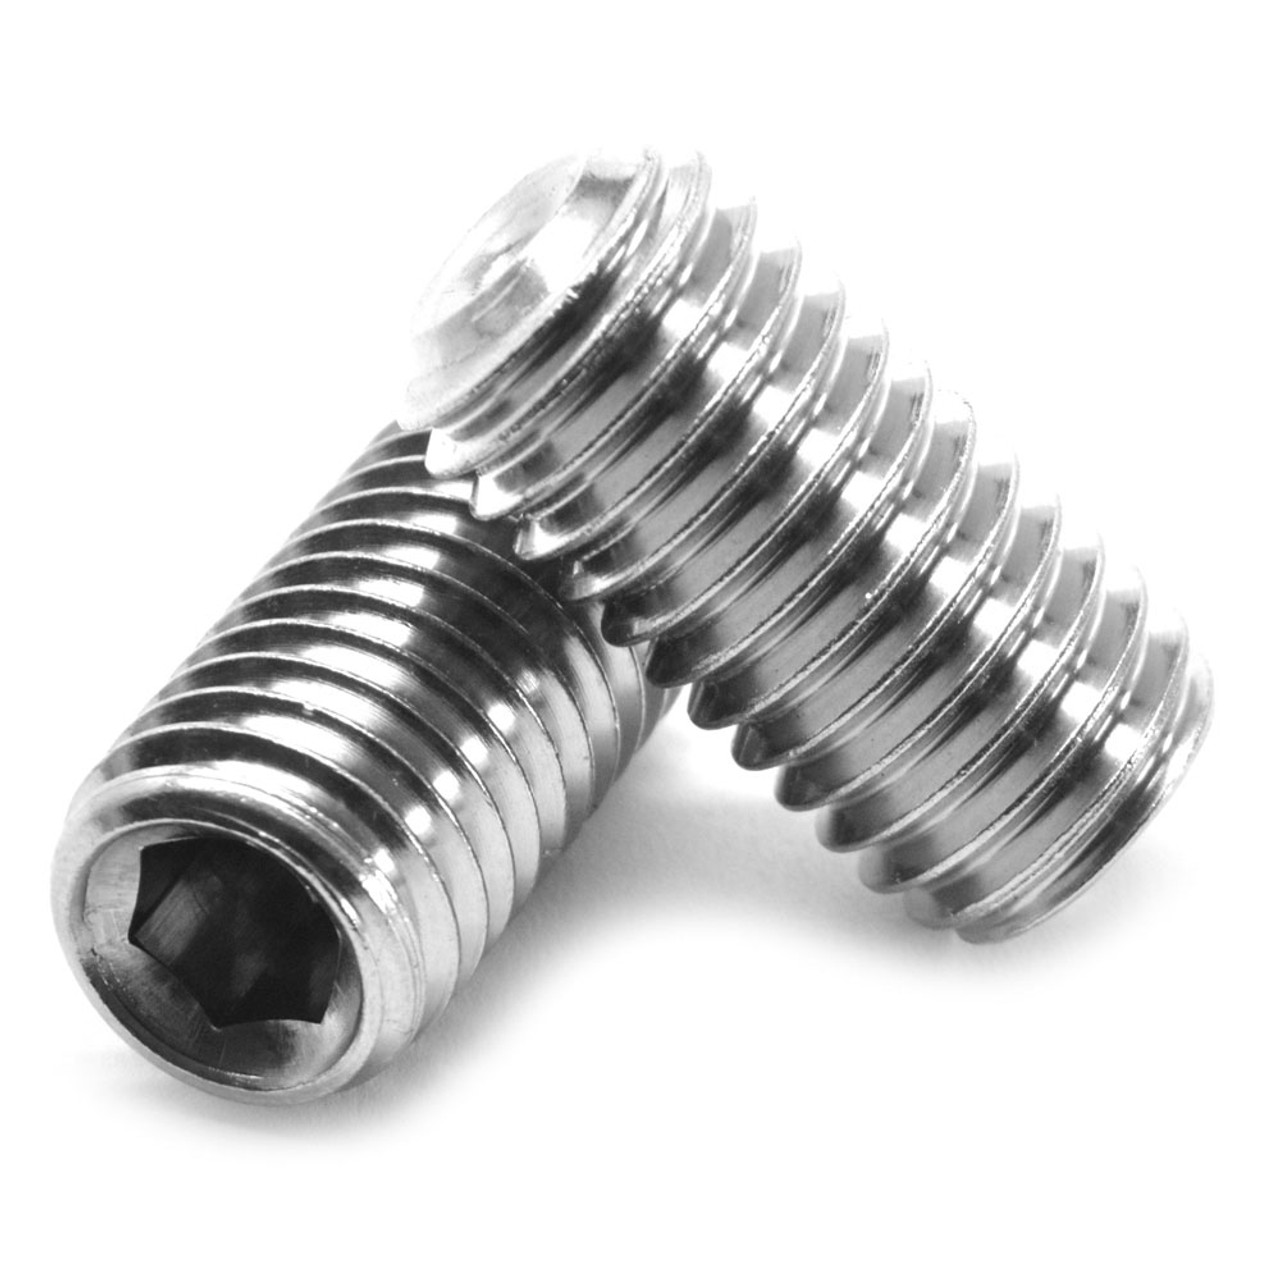 M6 x 1.00 x 45 MM Coarse Thread DIN 916 / ISO 4029 Socket Set Screw Cup Point Stainless Steel 18-8